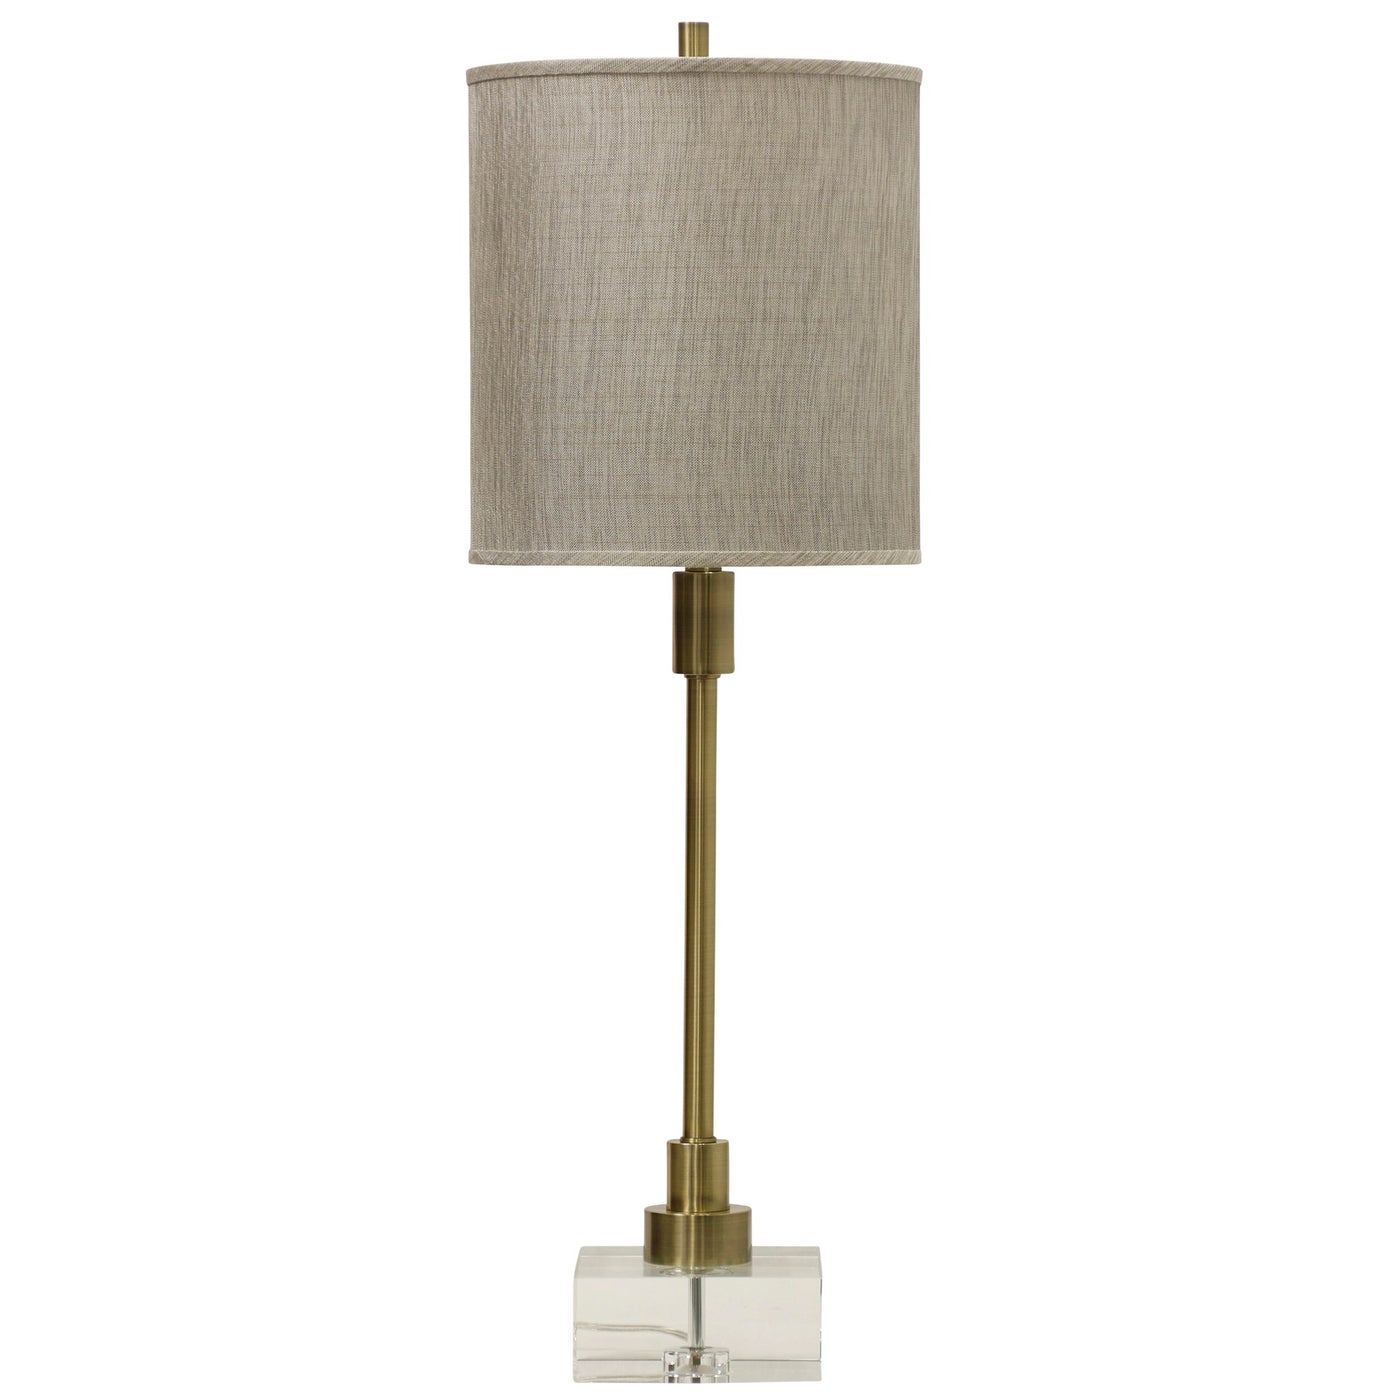 LENOX TABLE LAMP  Antique Brass Finish on Metal Body with Crystal